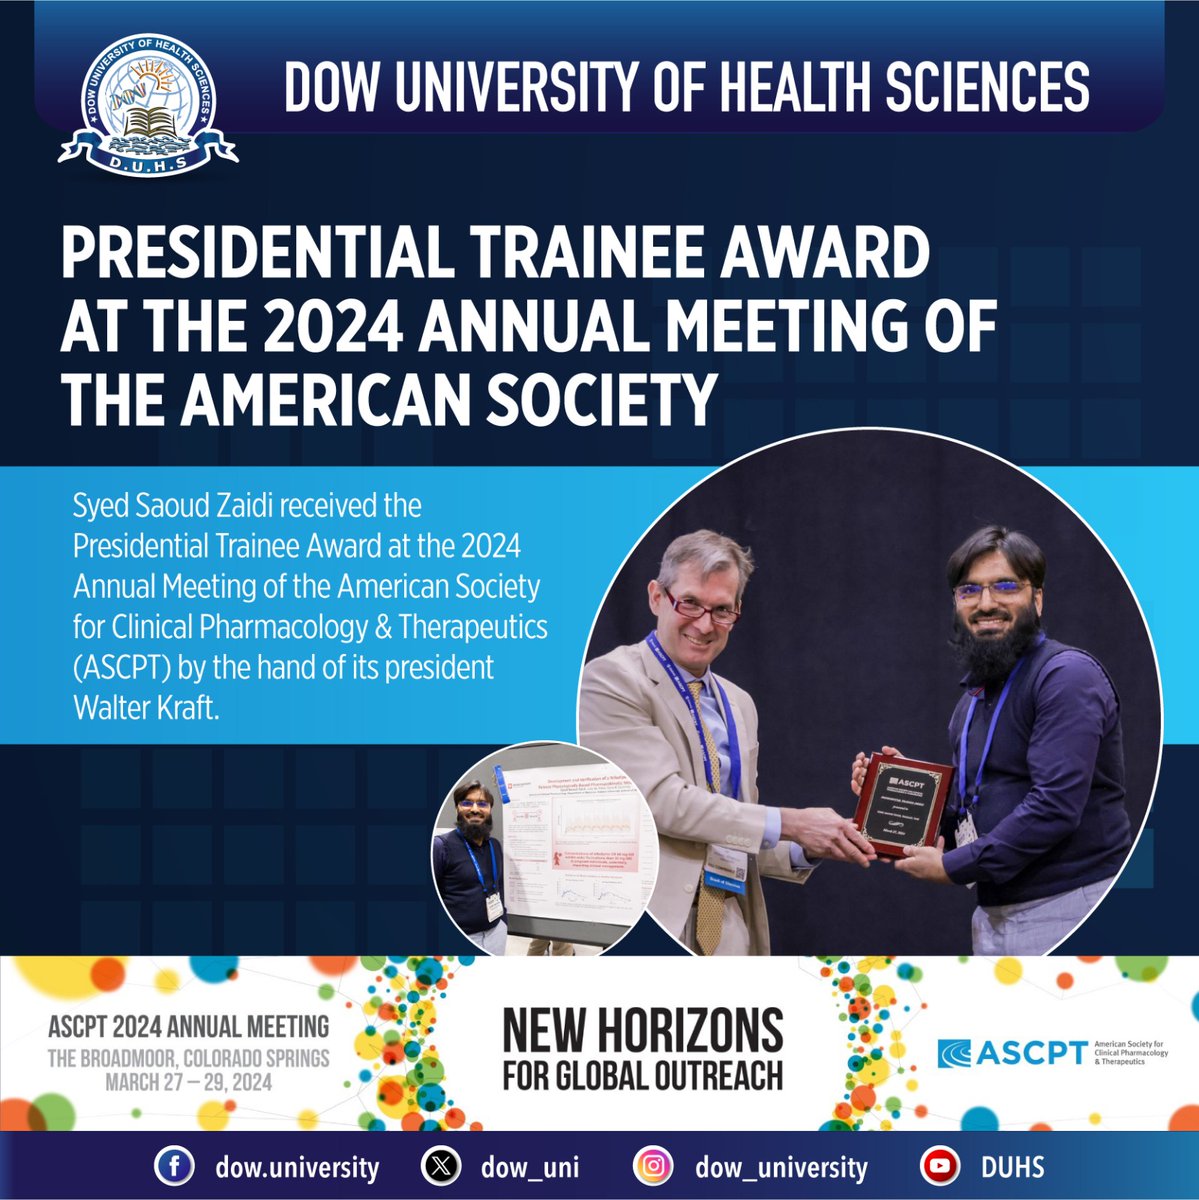 Syed Saoud Zaidi, an assistant Professor of Pharmaceutics at the Dow College of Pharmacy received the top poster and Presidential Trainee Award at the 2024 Annual Meeting of the American Society for Clinical Pharmacology & Therapeutics (ASCPT) by its president Walter Kraft.